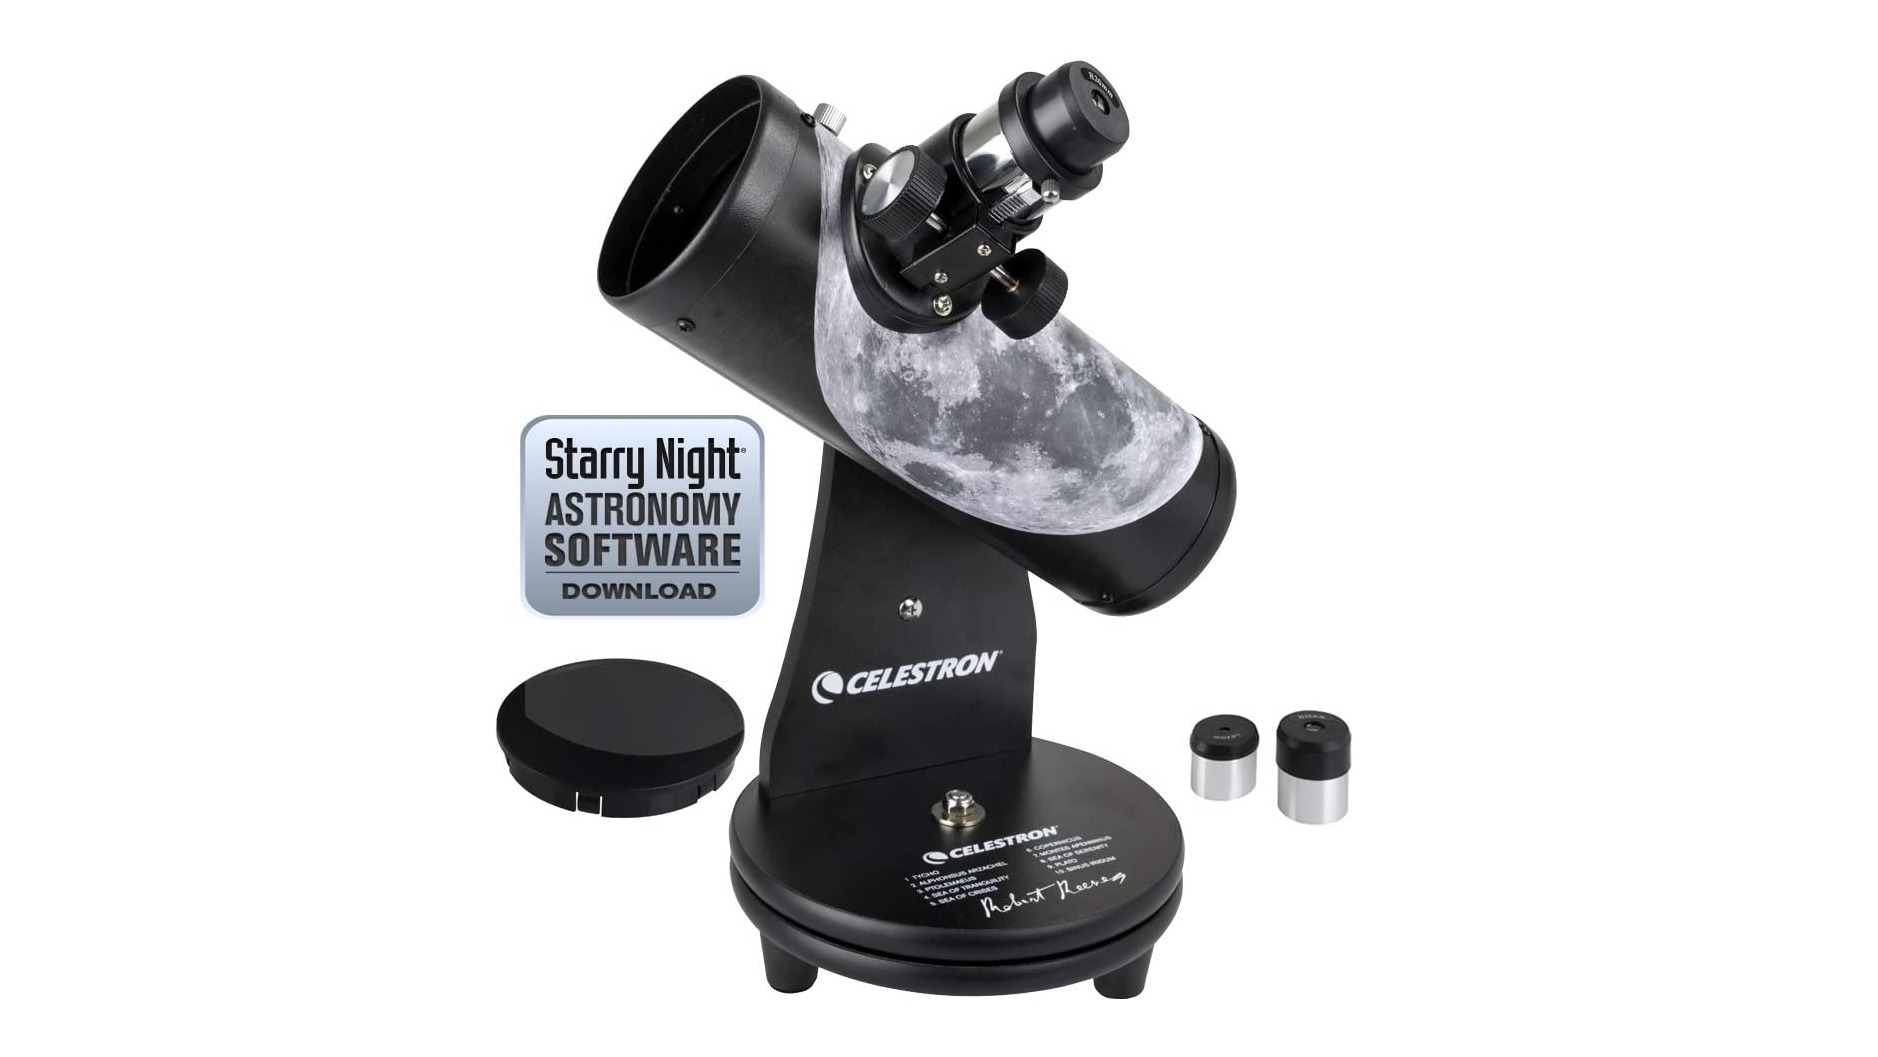 Save 10% on a great beginner astronomy gift: Celestron 76mm Signature Series FirstScope